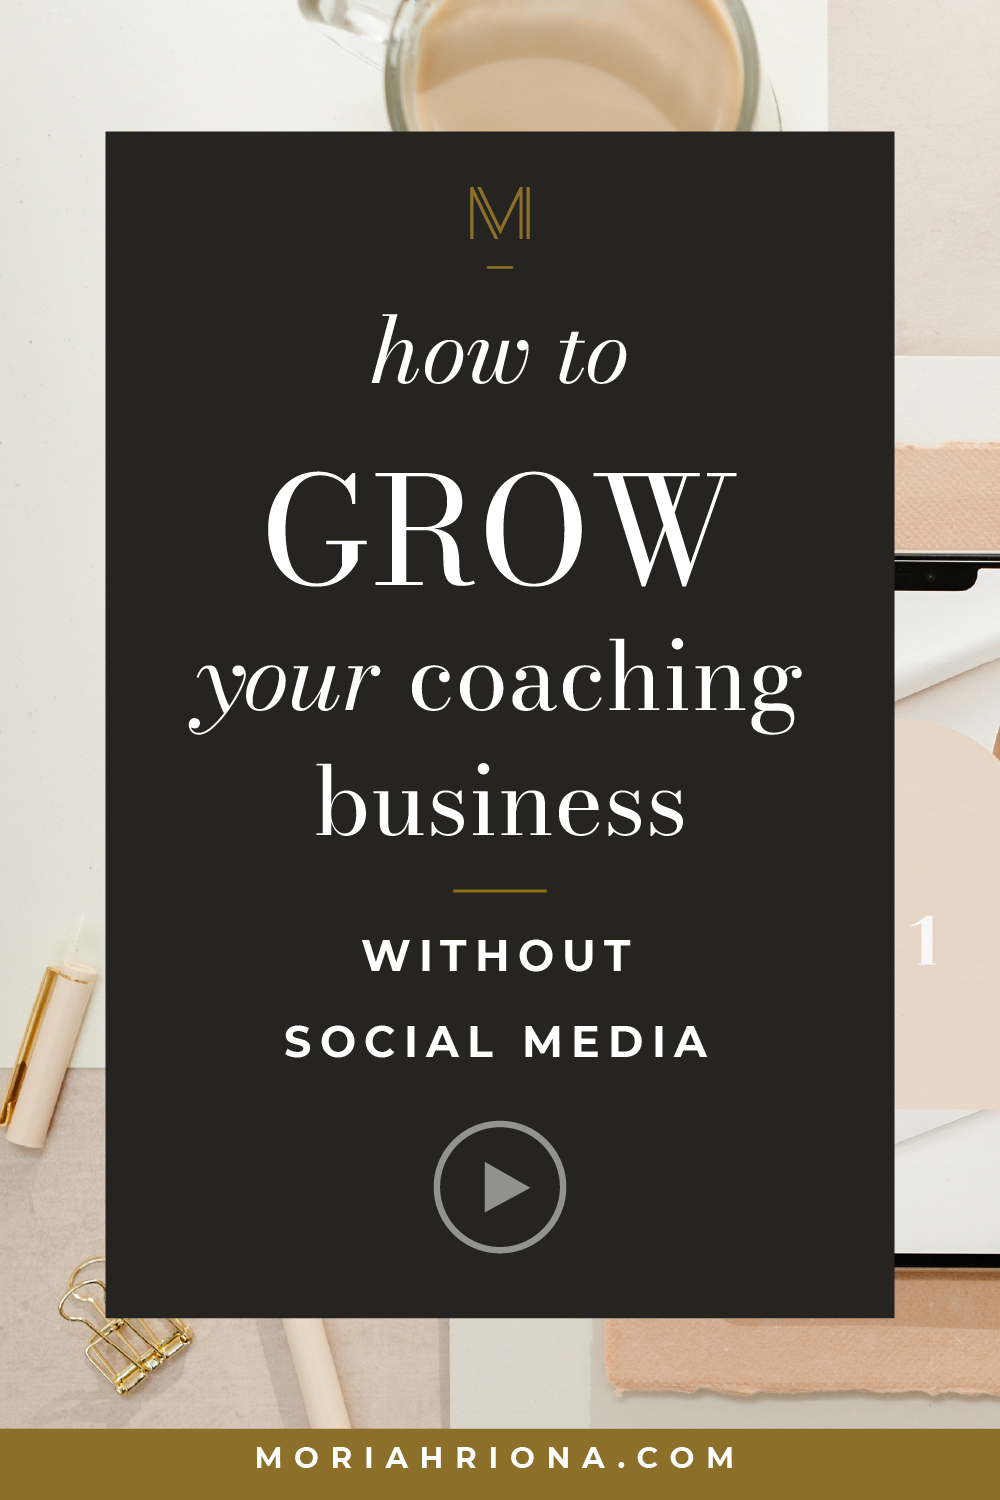 Wishing you could quit social media, stop mindlessly scrolling, and start being productive again? You can! I’m sharing why I quit social media—and how this one simple change brought MAJOR success to my business. #socialmedia #socialmediamarketing #lifecoachingbusiness